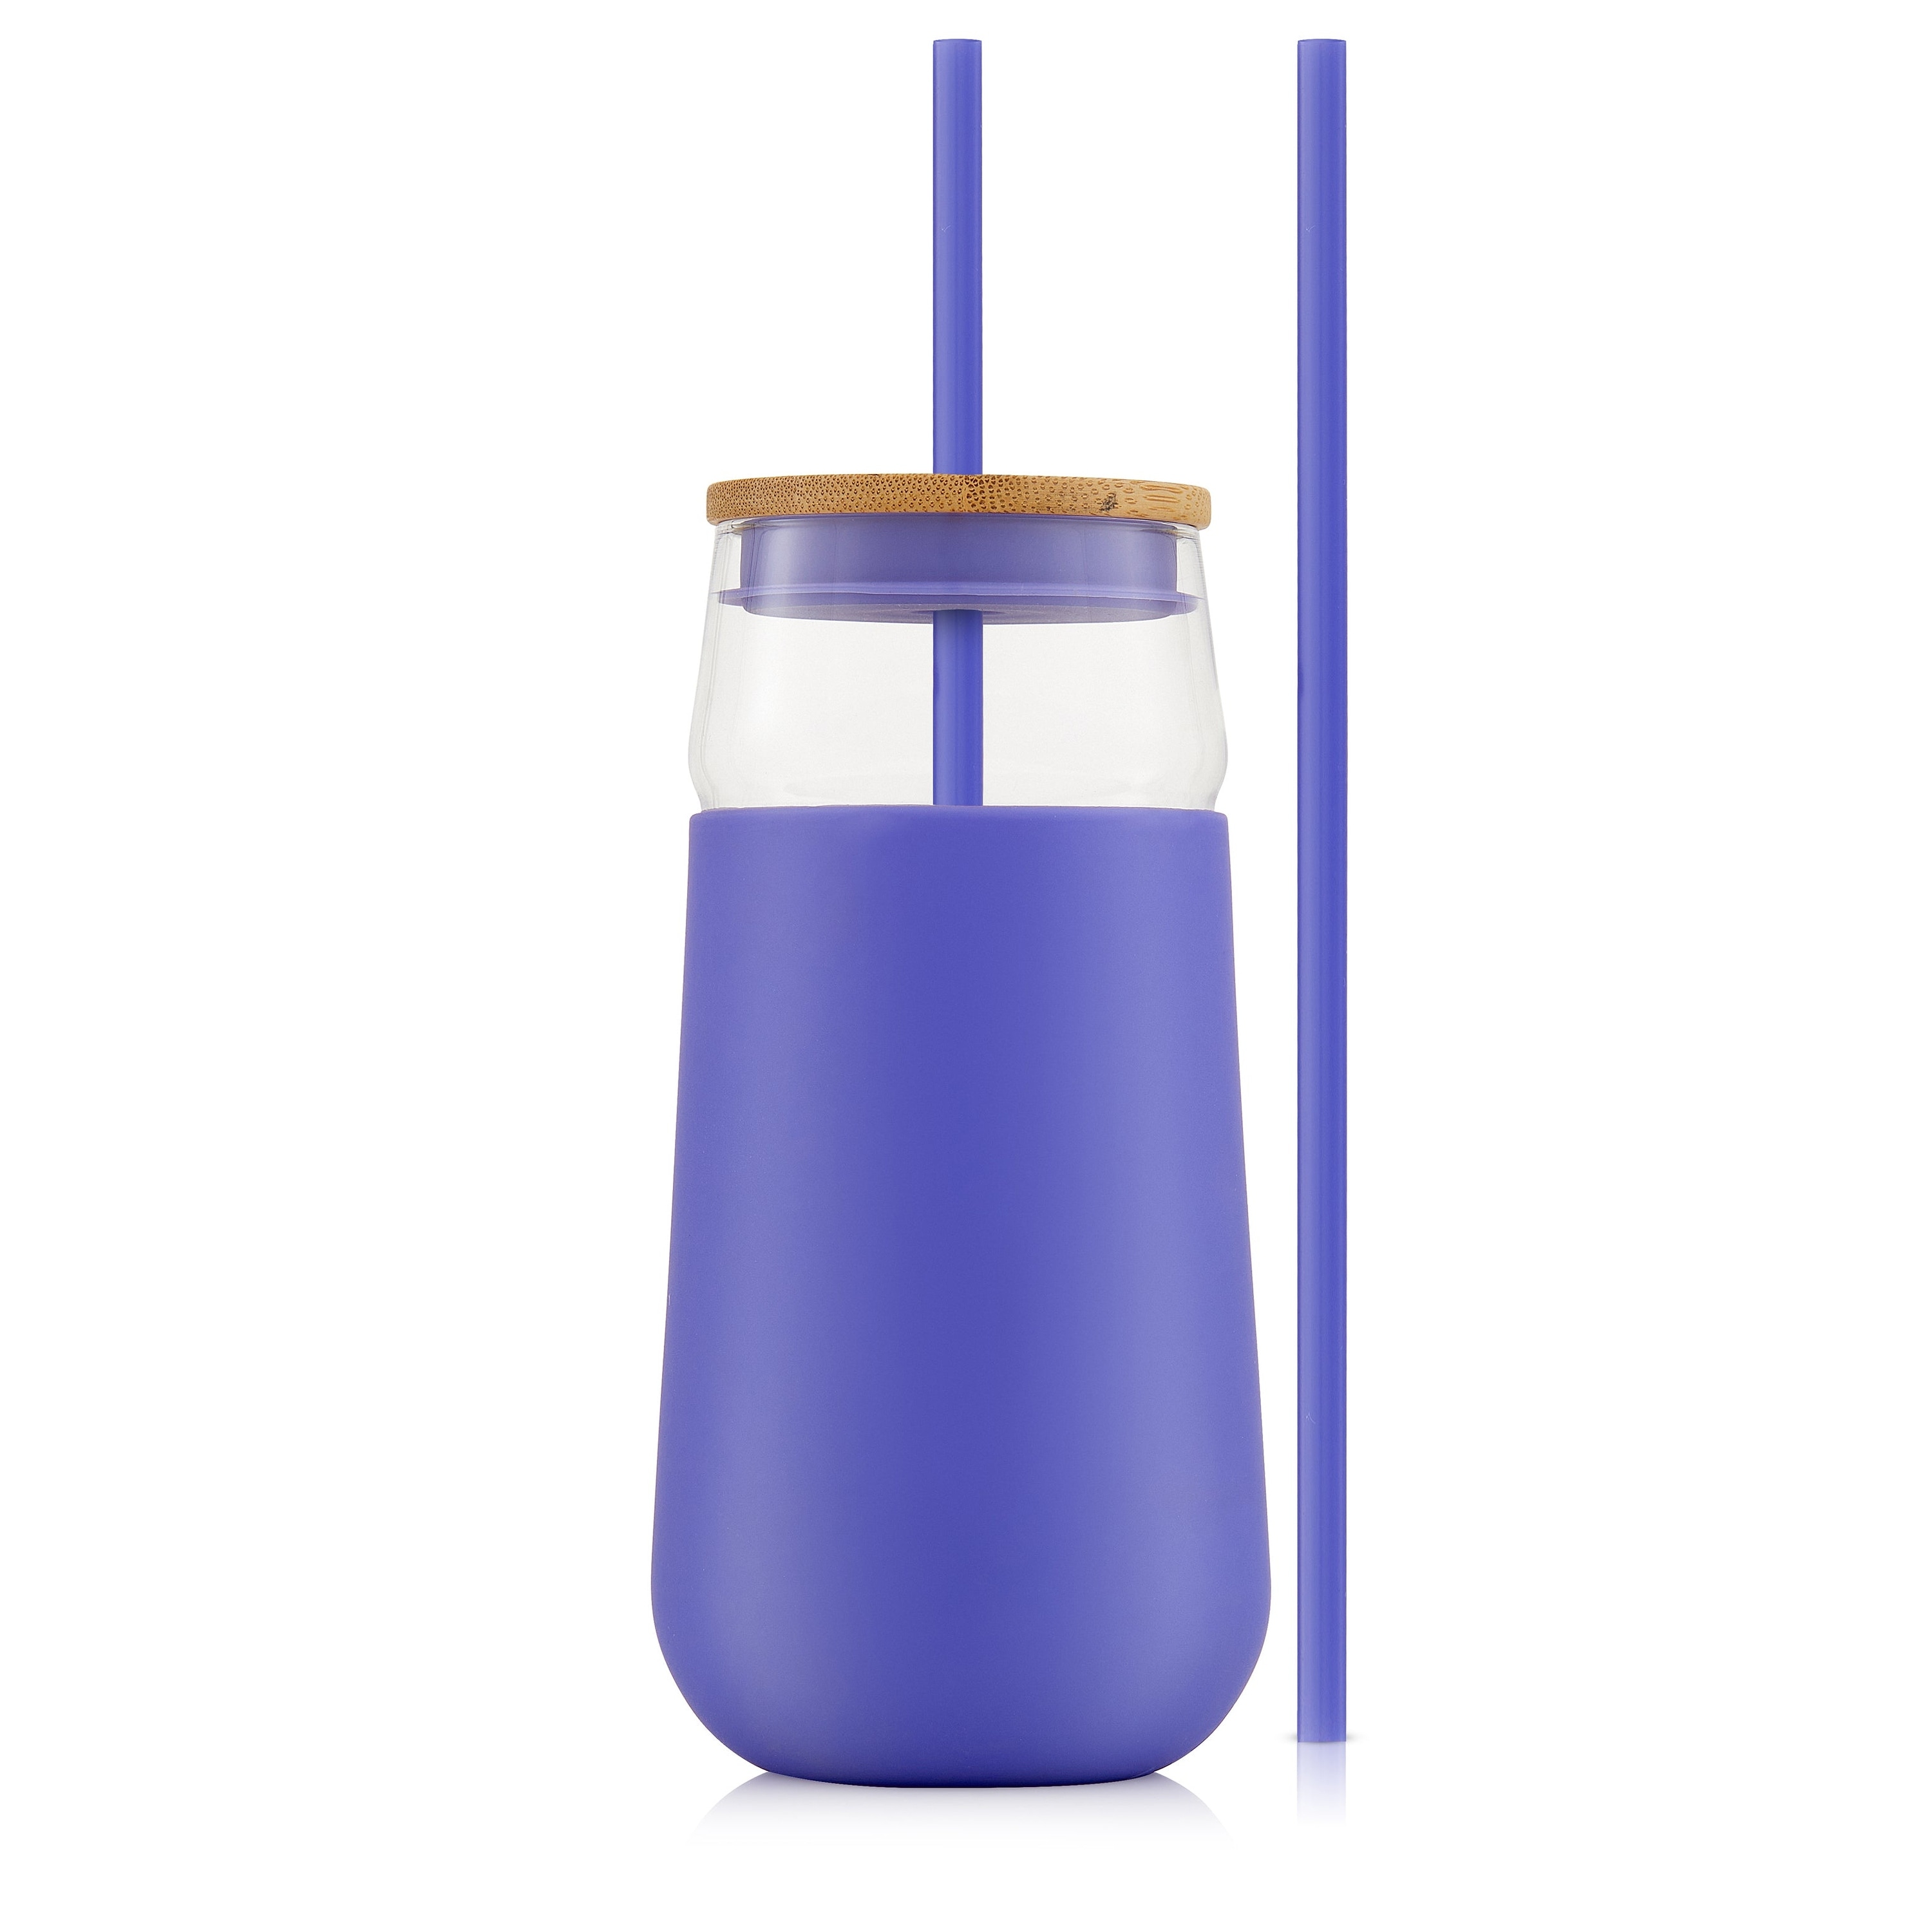 https://ak1.ostkcdn.com/images/products/is/images/direct/3b60a31cd182c550ac97b668773cd79e82c5bb70/JoyJolt-Glass-Tumbler-with-1-Straws-%26-Non-Slip-Silicone-Sleeve---20-oz.jpg